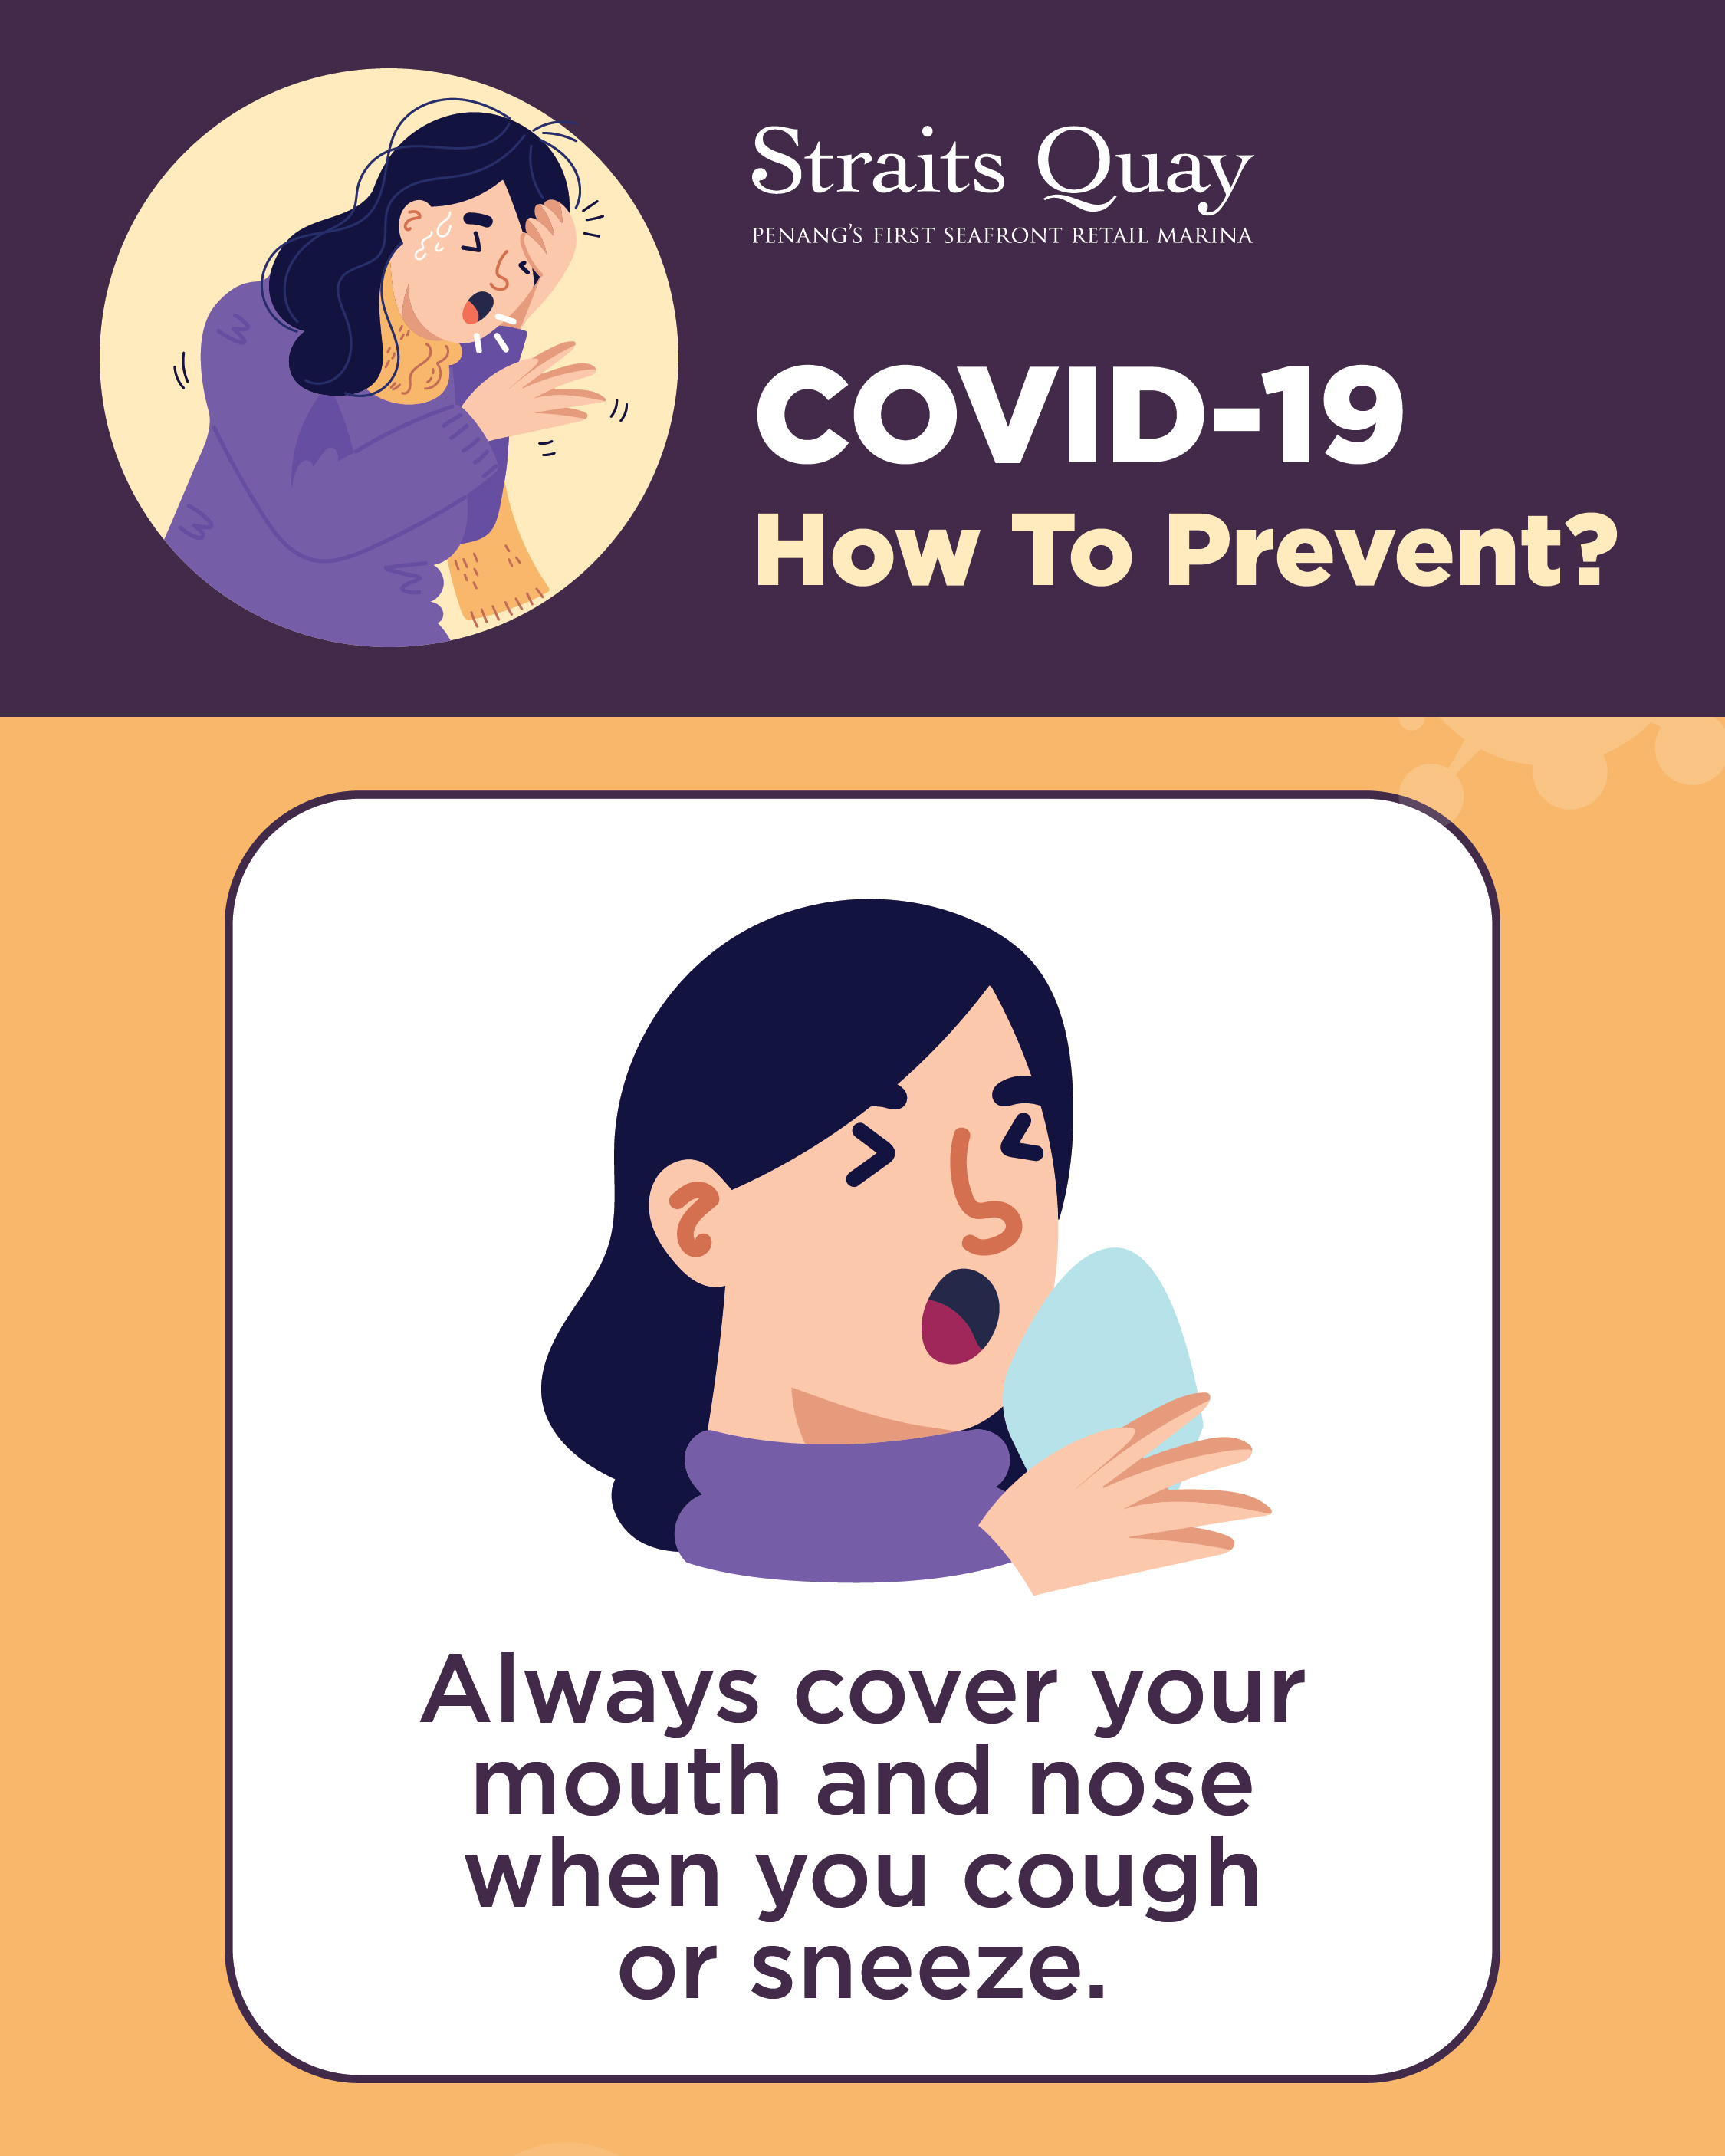 How to Prevent Covid-19? | Straits Quay